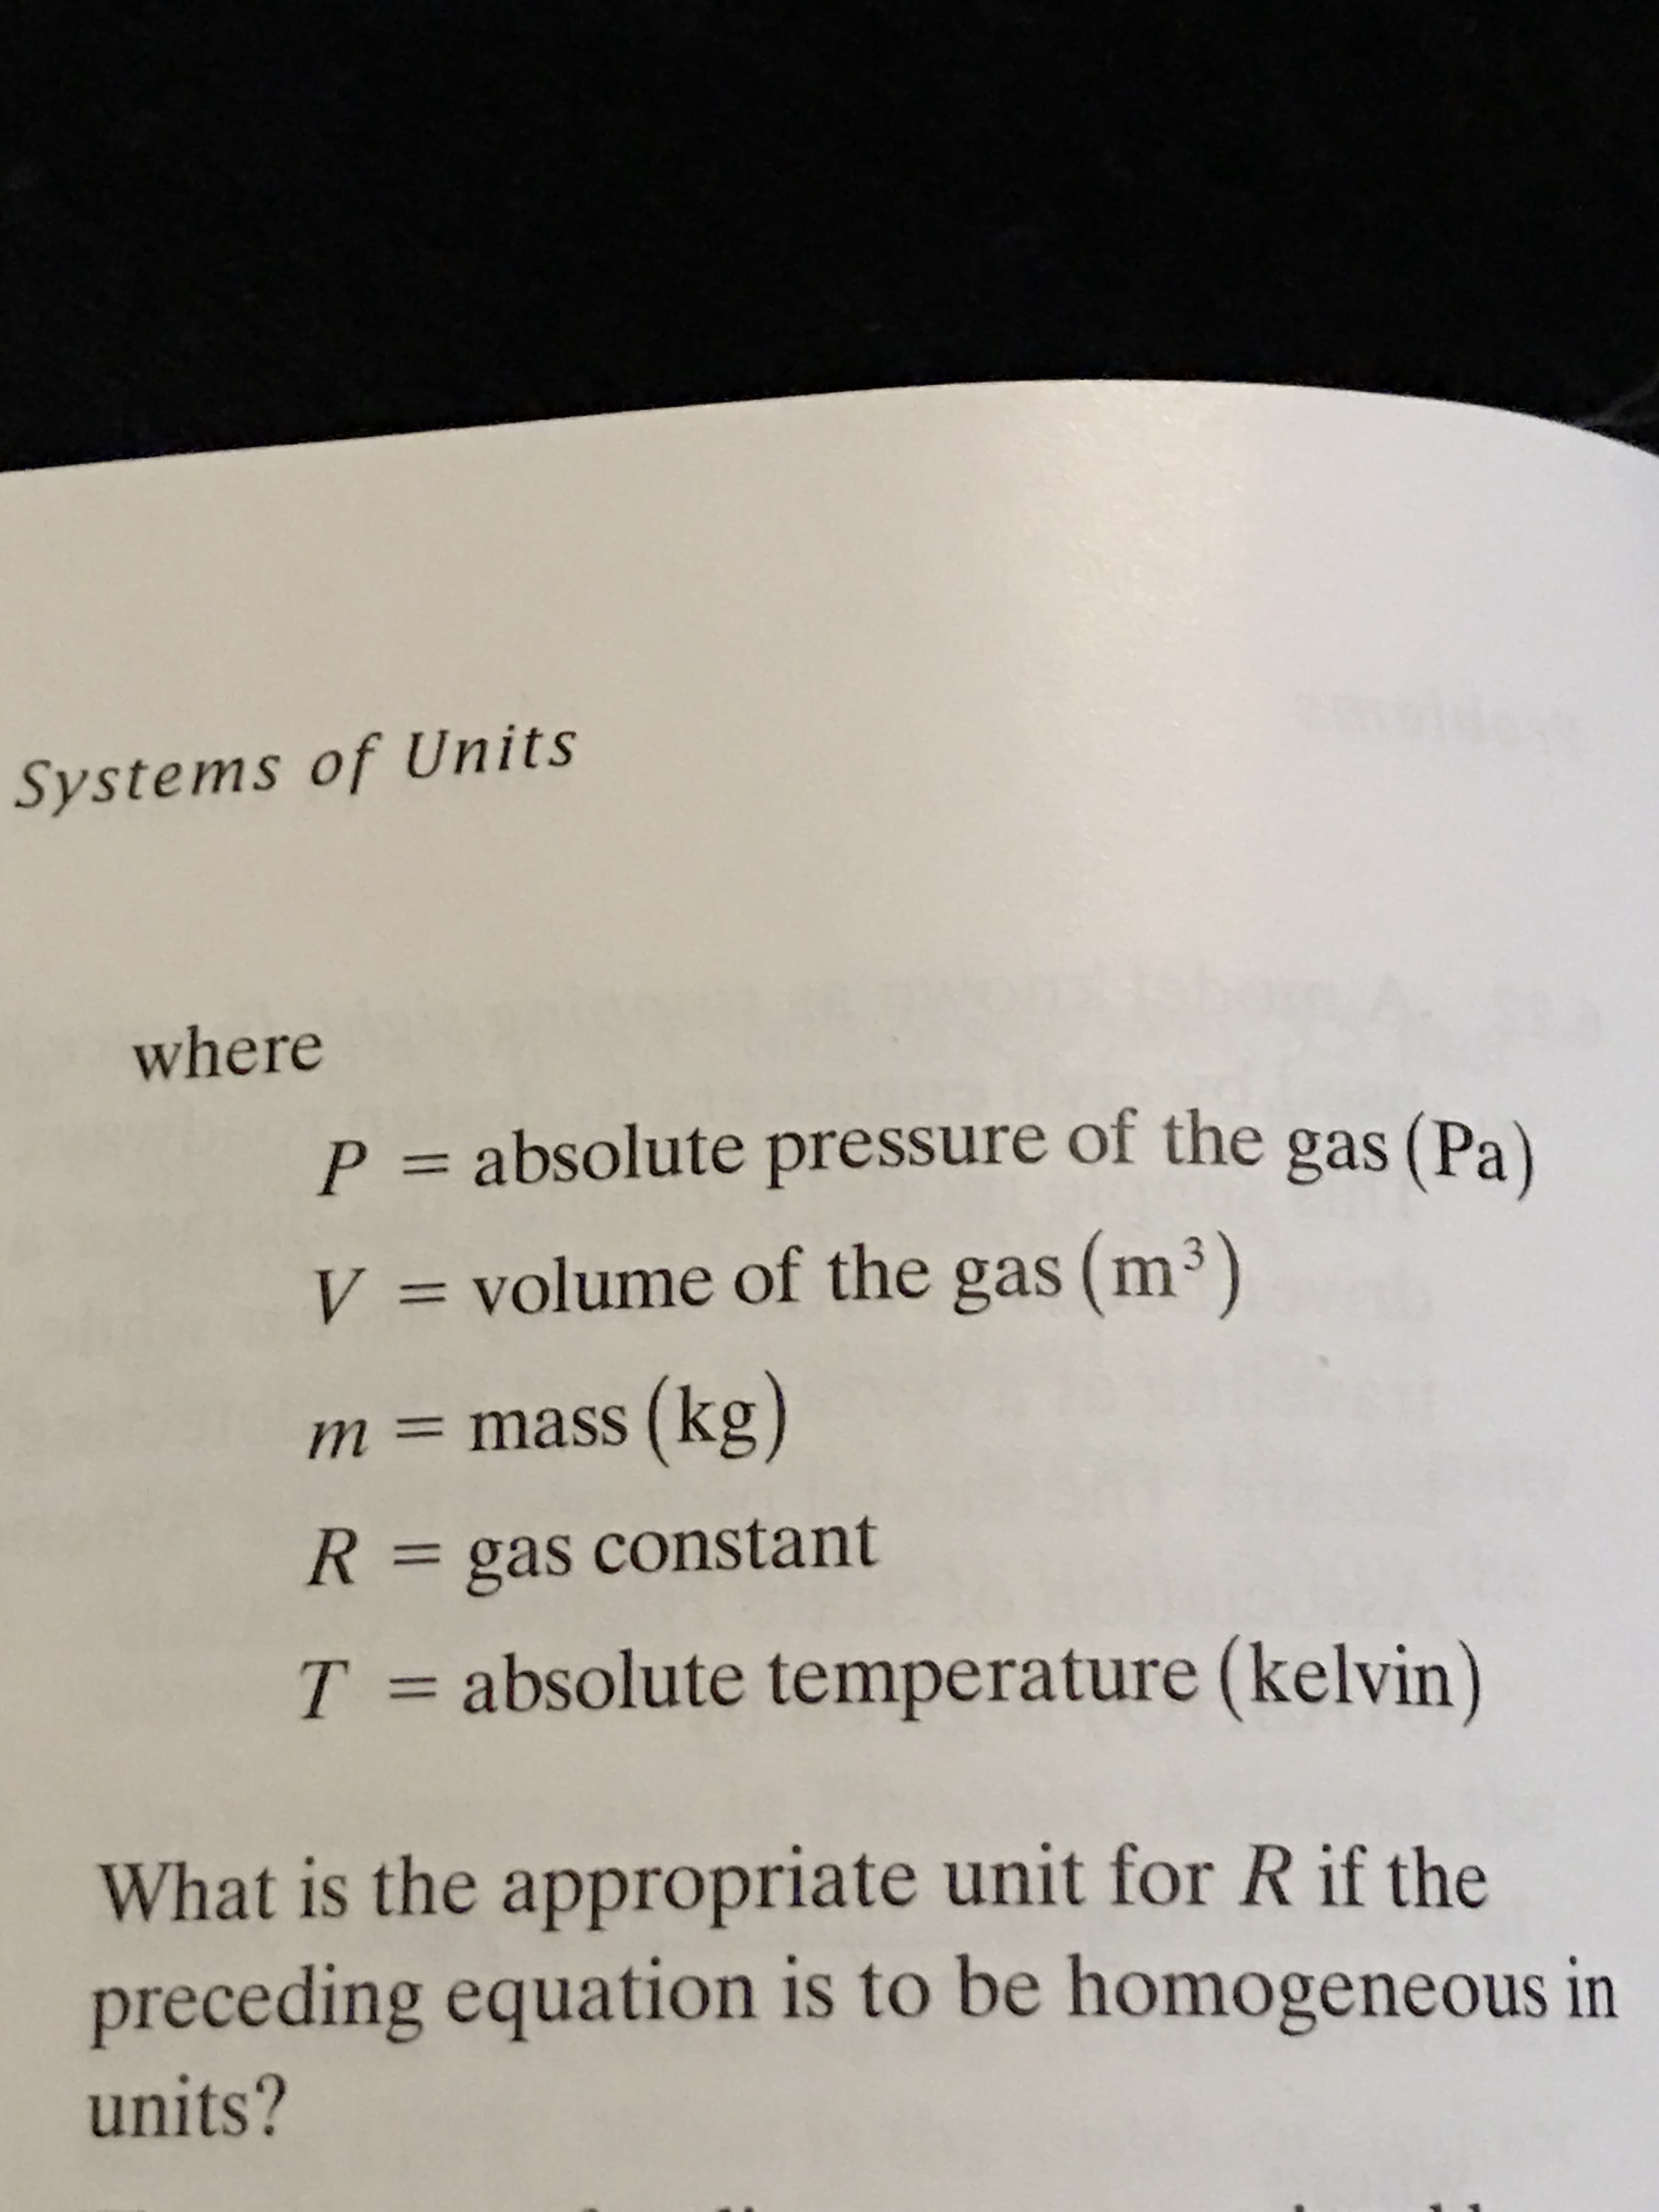 where
P = absolute pressure of the gas (Pa)
V = volume of the gas (m³)
%3D
m = mass (kg)
R = gas constant
%3D
T = absolute temperature (kelvin)
What is the appropriate unit for R if the
preceding equation is to be homogeneous in
units?
